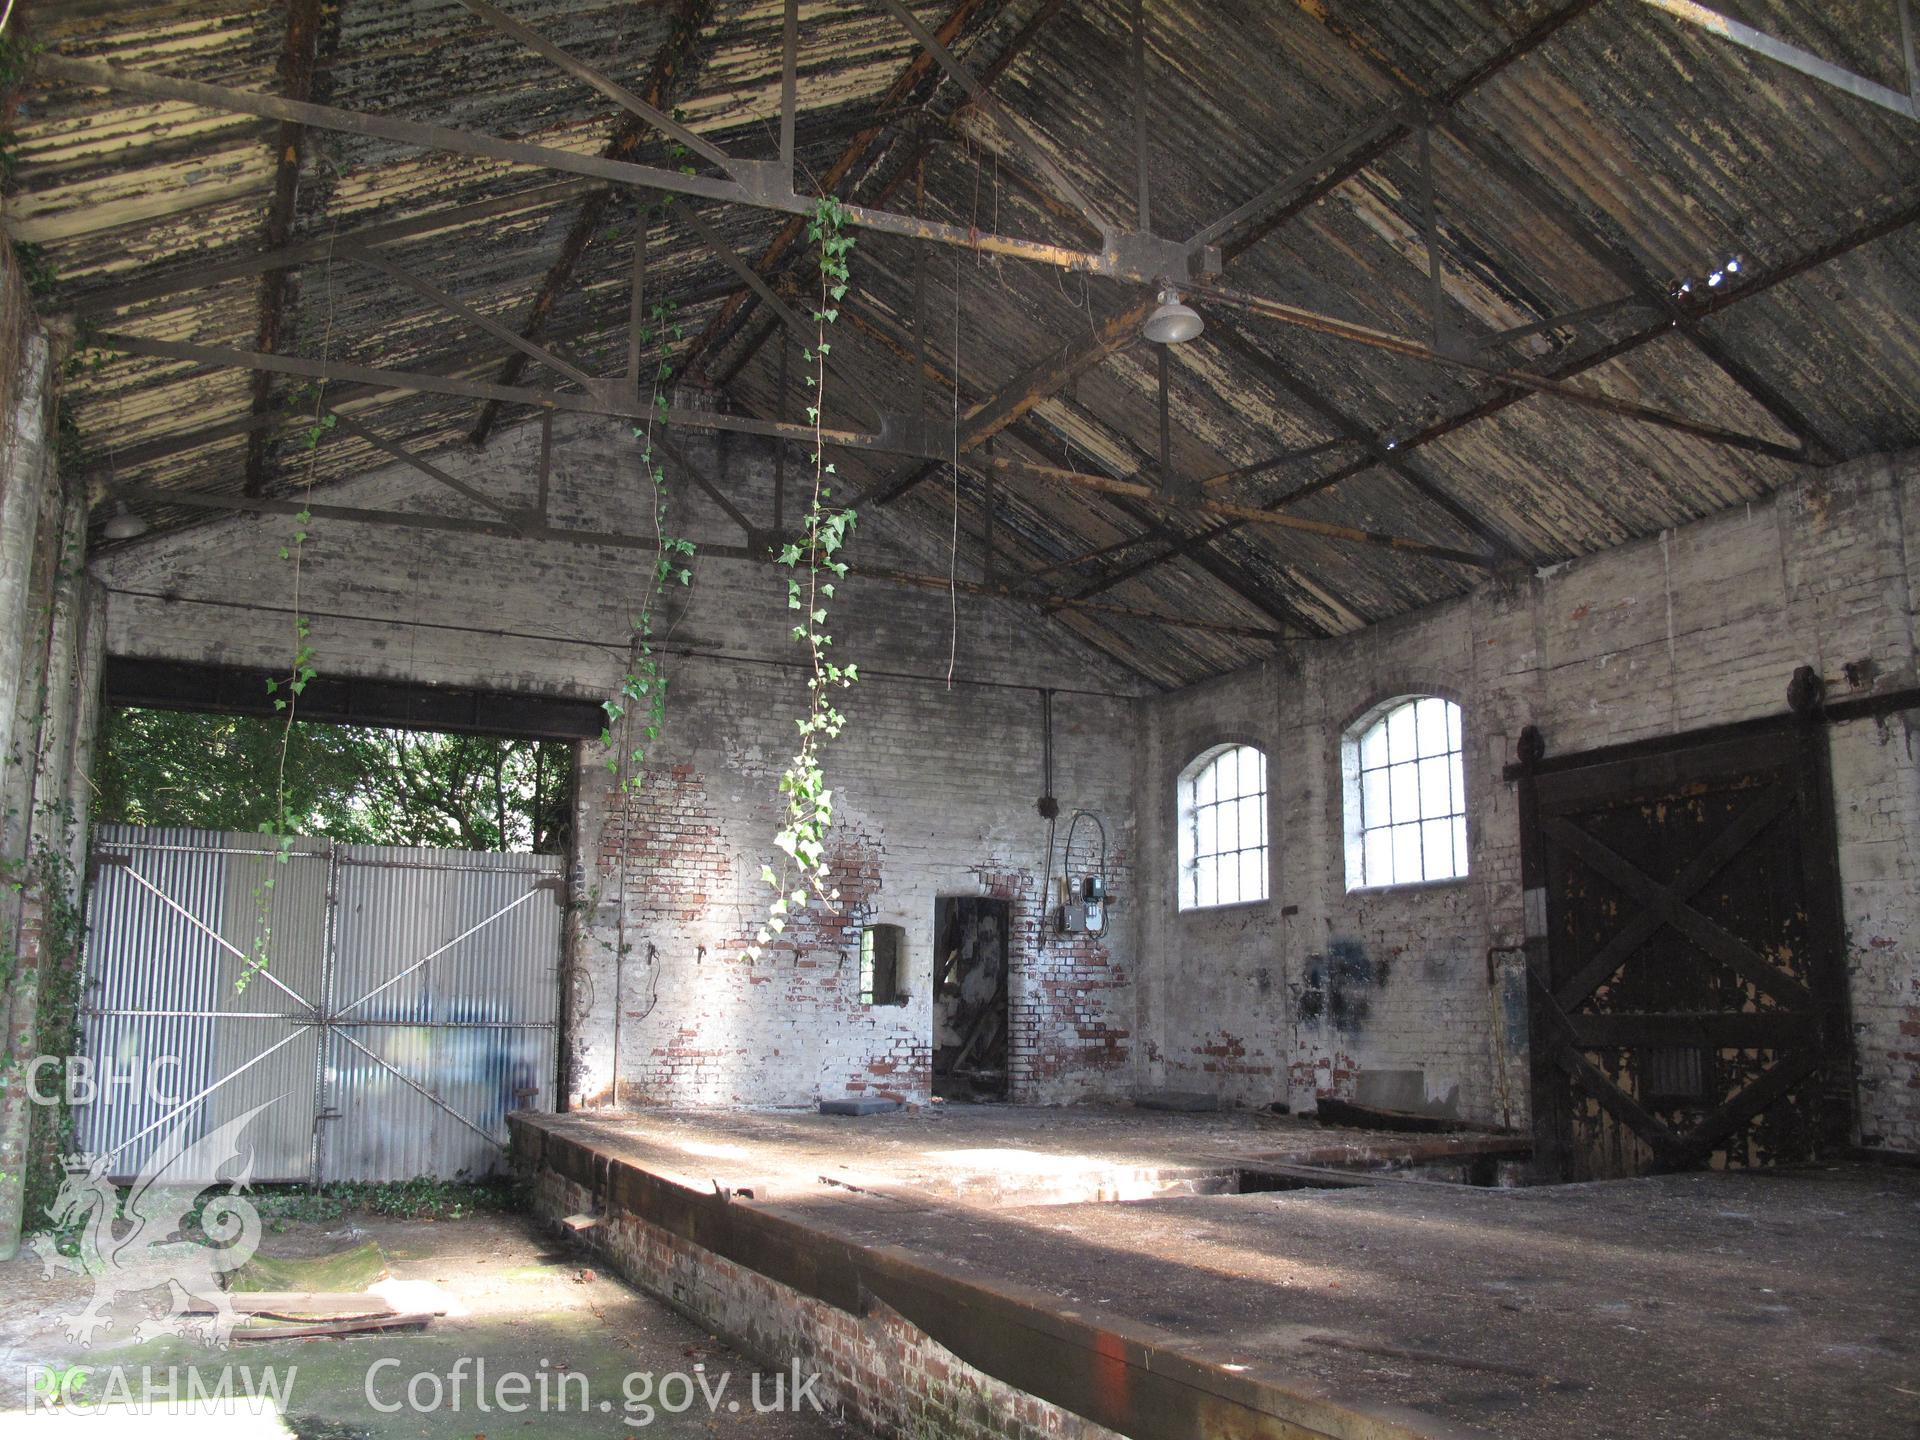 Interior view of Usk Railway Goods Shed.